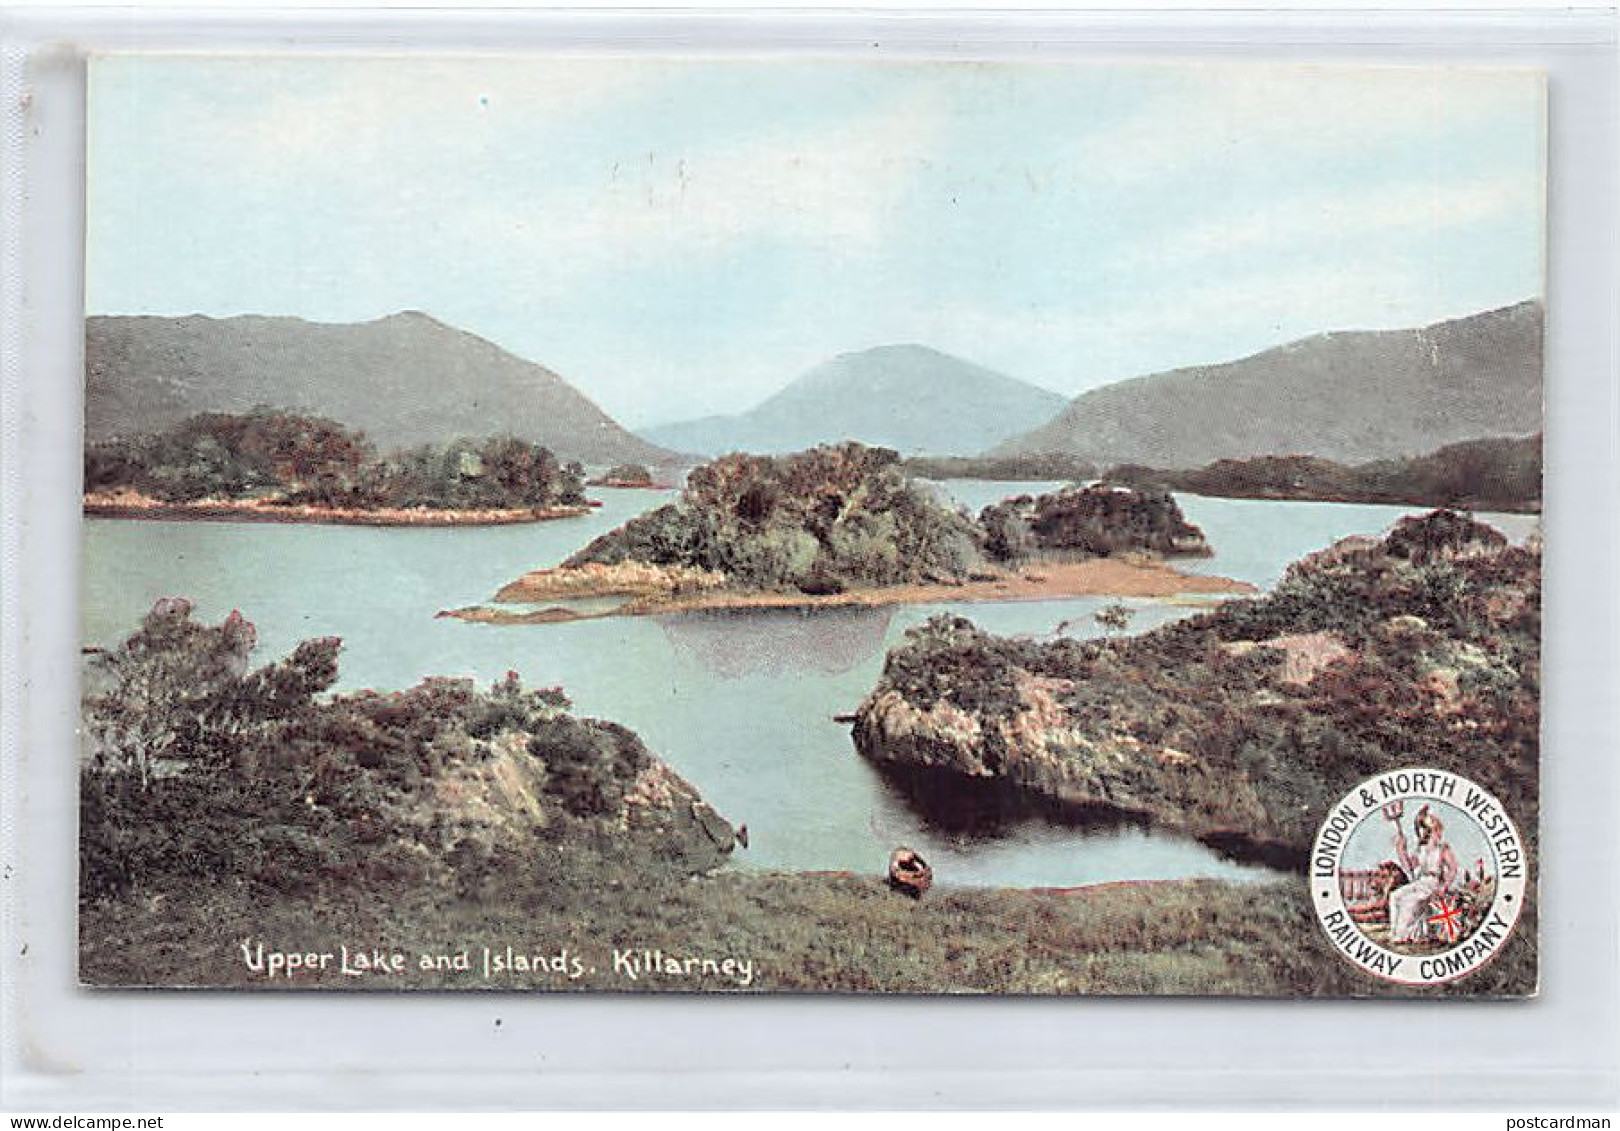 Eire - KILLARNEY (Kerry) Upper Lake And Islands - Kerry